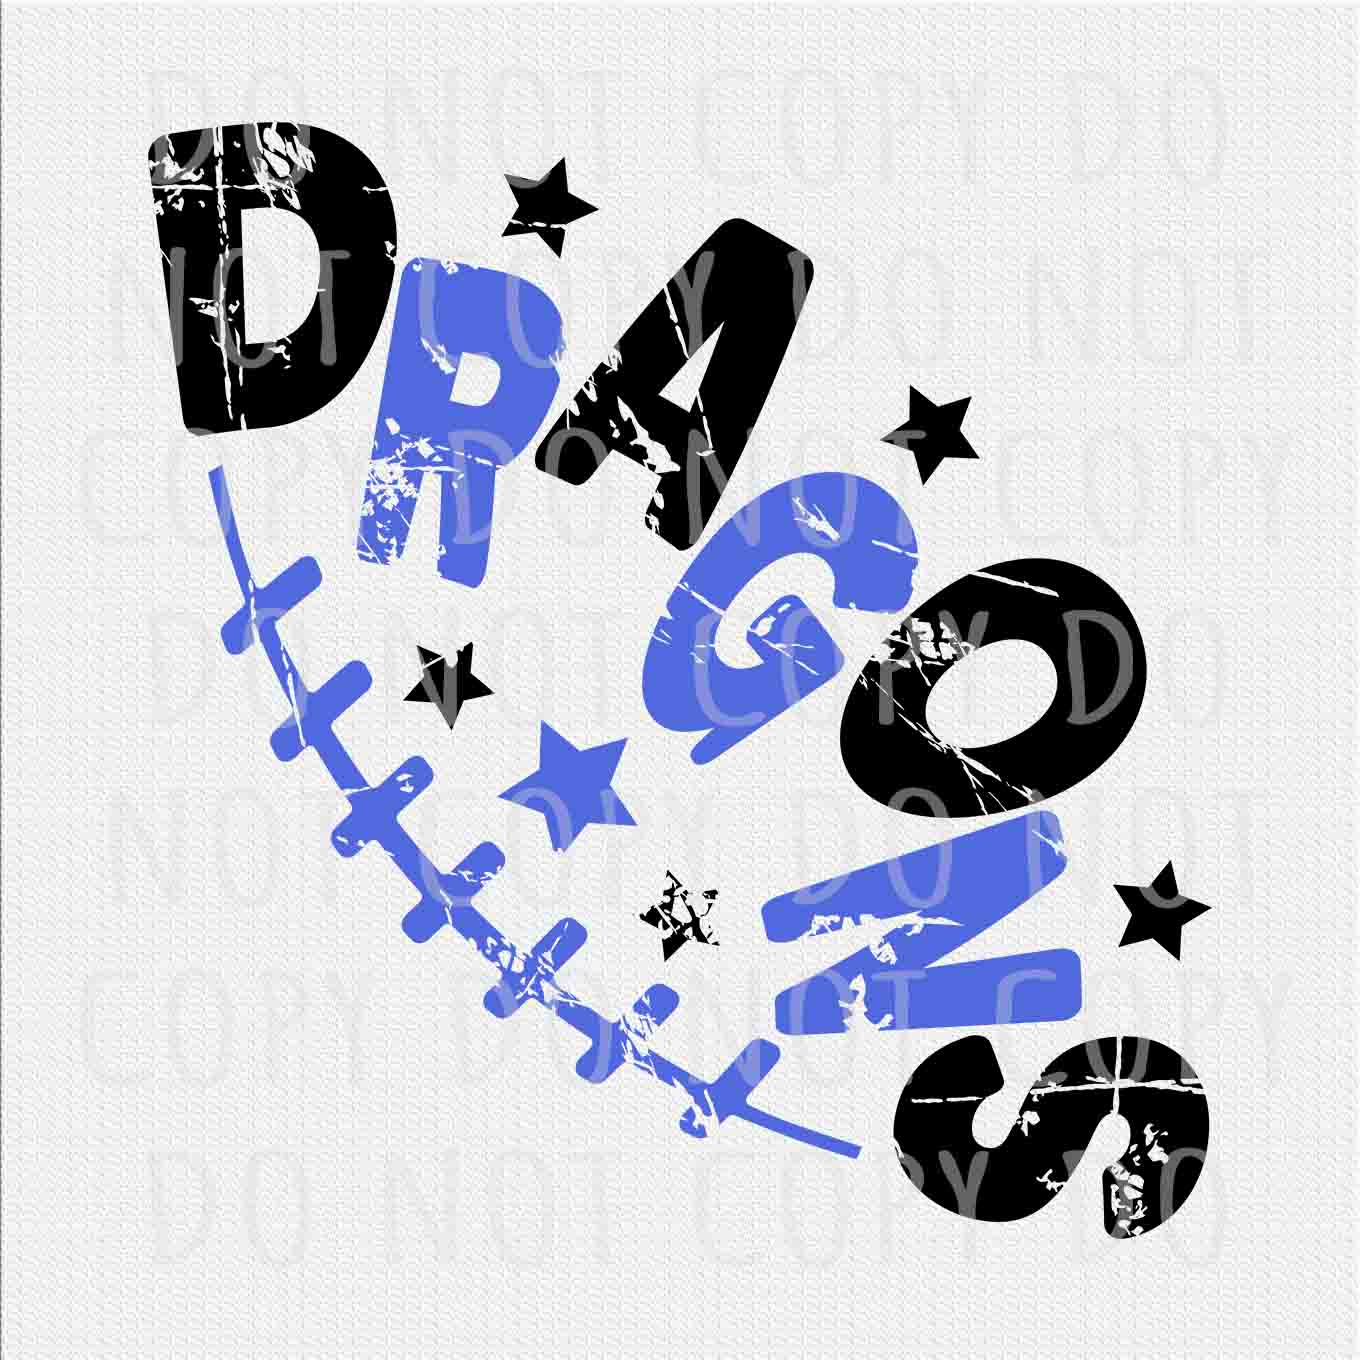 Dragons png (+ 5 designs FREE), Dragons White Black Gold Royal bluy Red Colors Distressed Letters Stars Football Mascot png